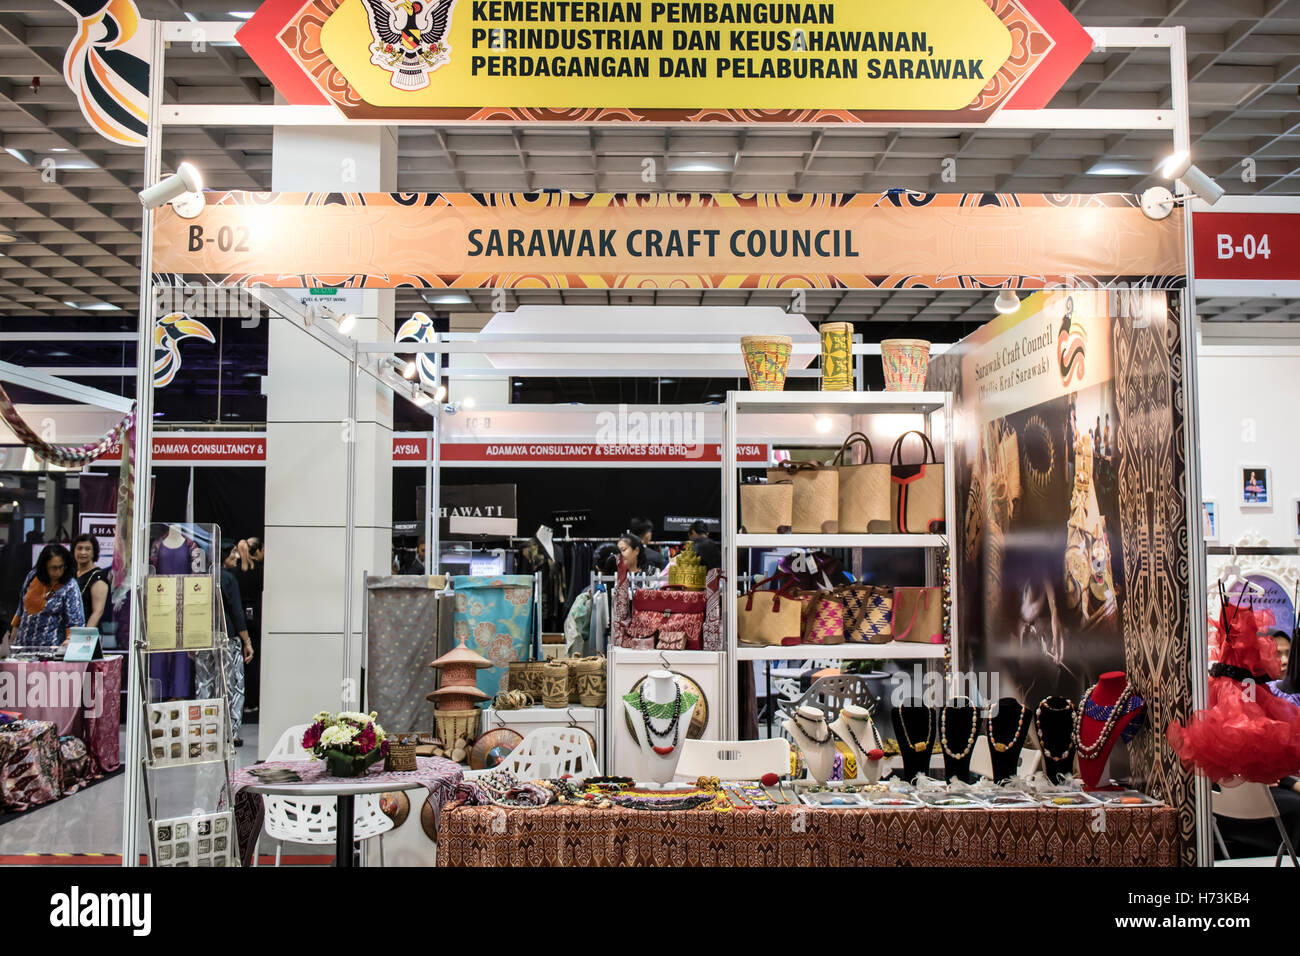 Kuala Lumpur, Malaysia. 2nd Nov, 2016.  Malaysia Fashion Week 2016 starts today at MATRADE in Kuala Lumpur, Malaysia. Fashion industry traders from Asia region gathers to market their clothings, cloths and handicrafts. A East Malaysian trader booth shows a variety of craft works. Credit:  Danny Chan/Alamy Live News. Stock Photo